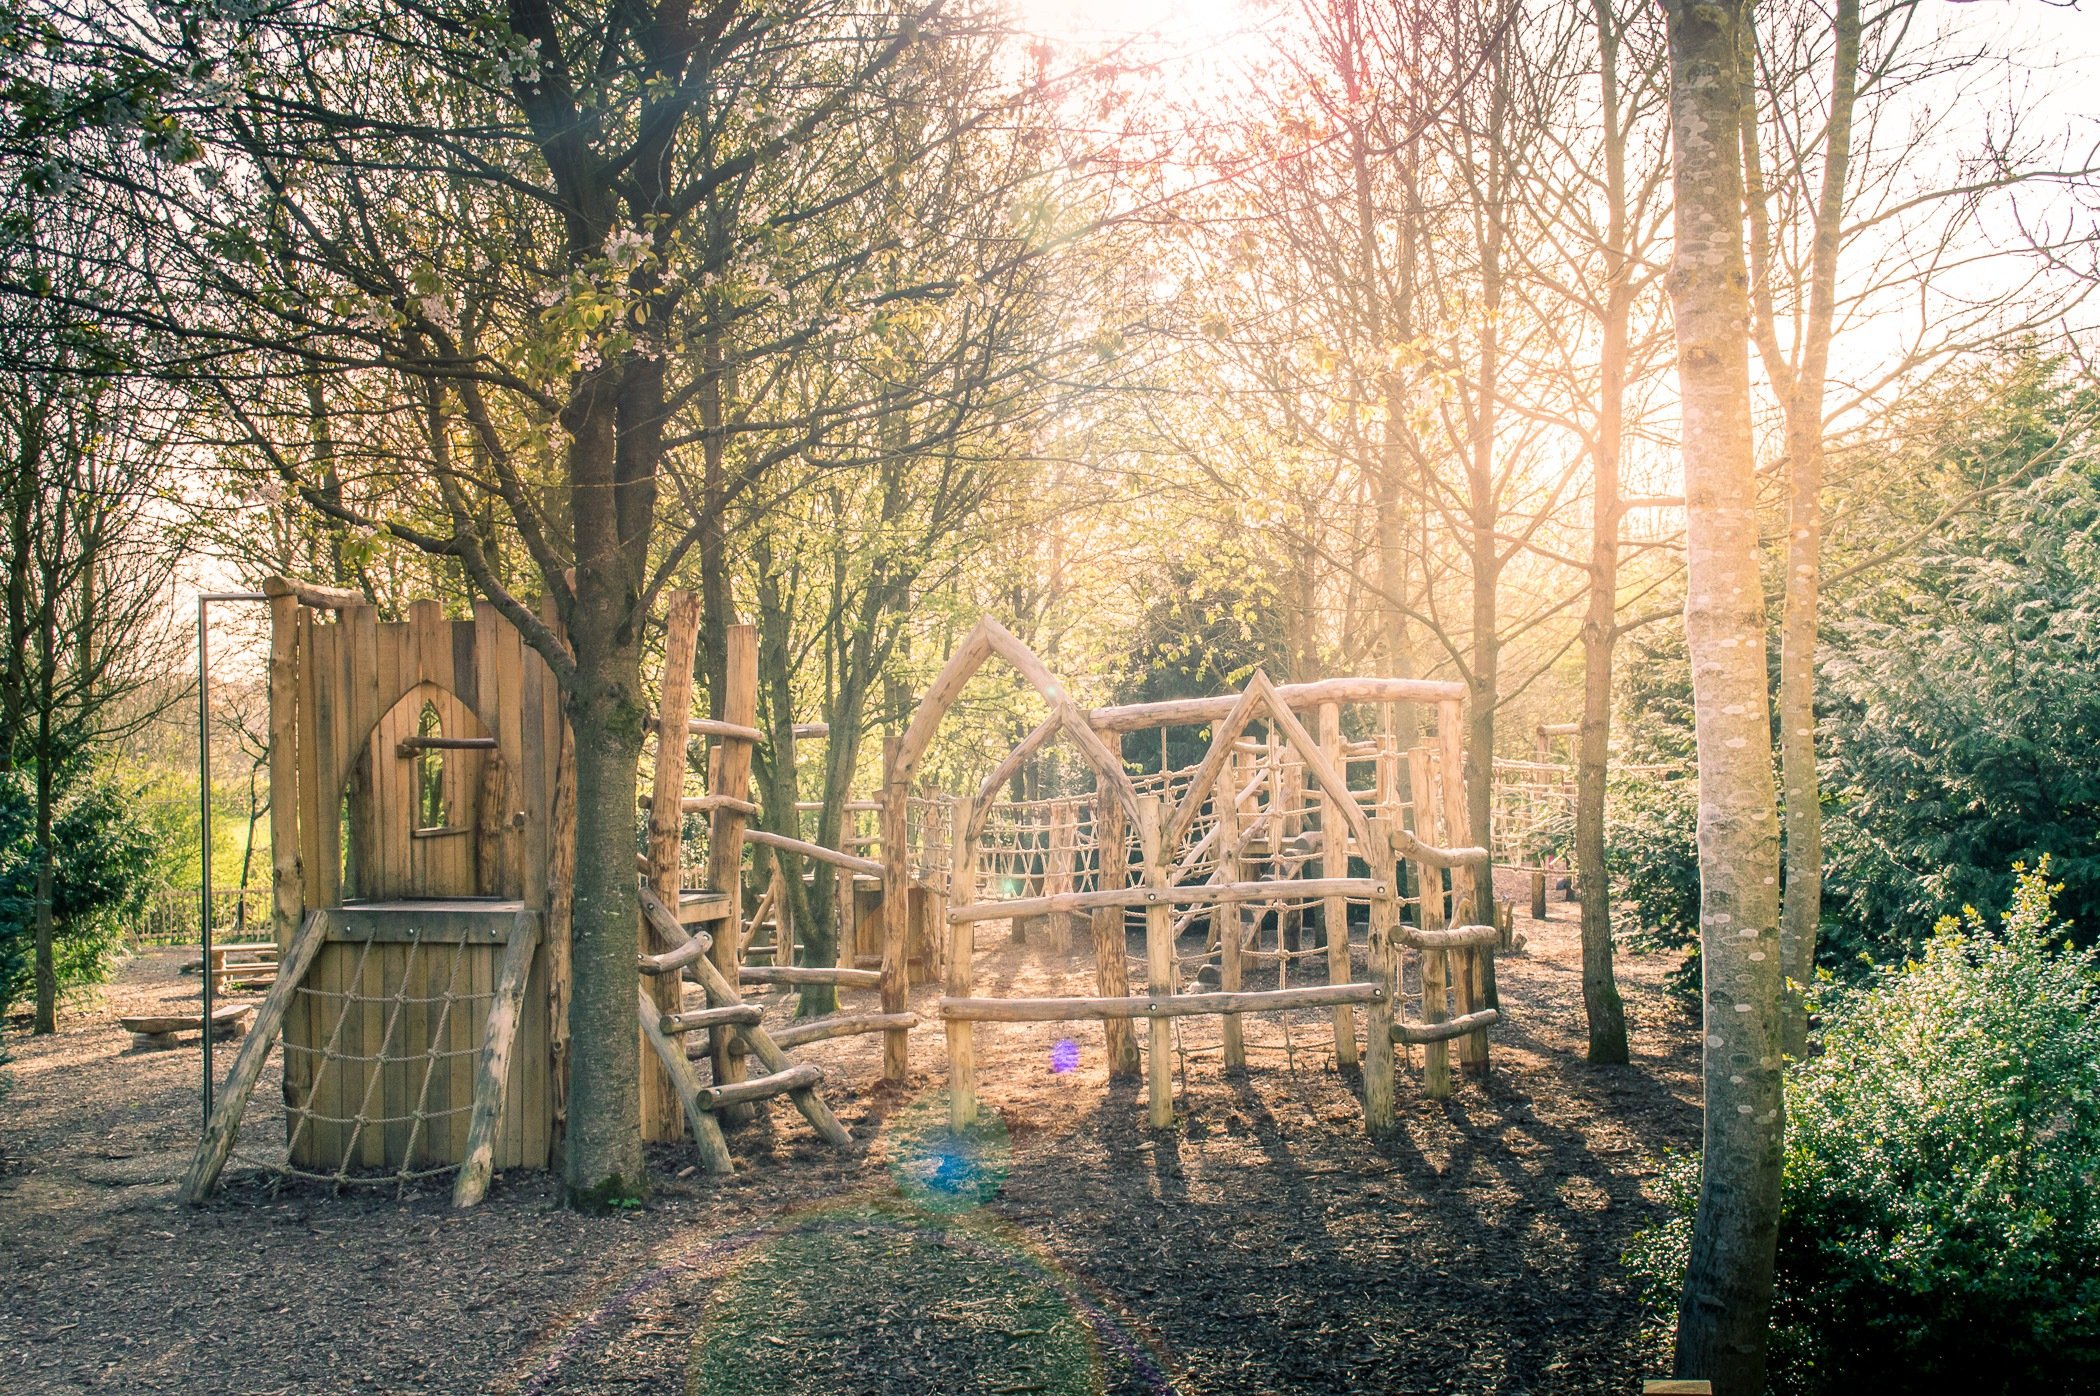 The Play Park at Fountains Abbey